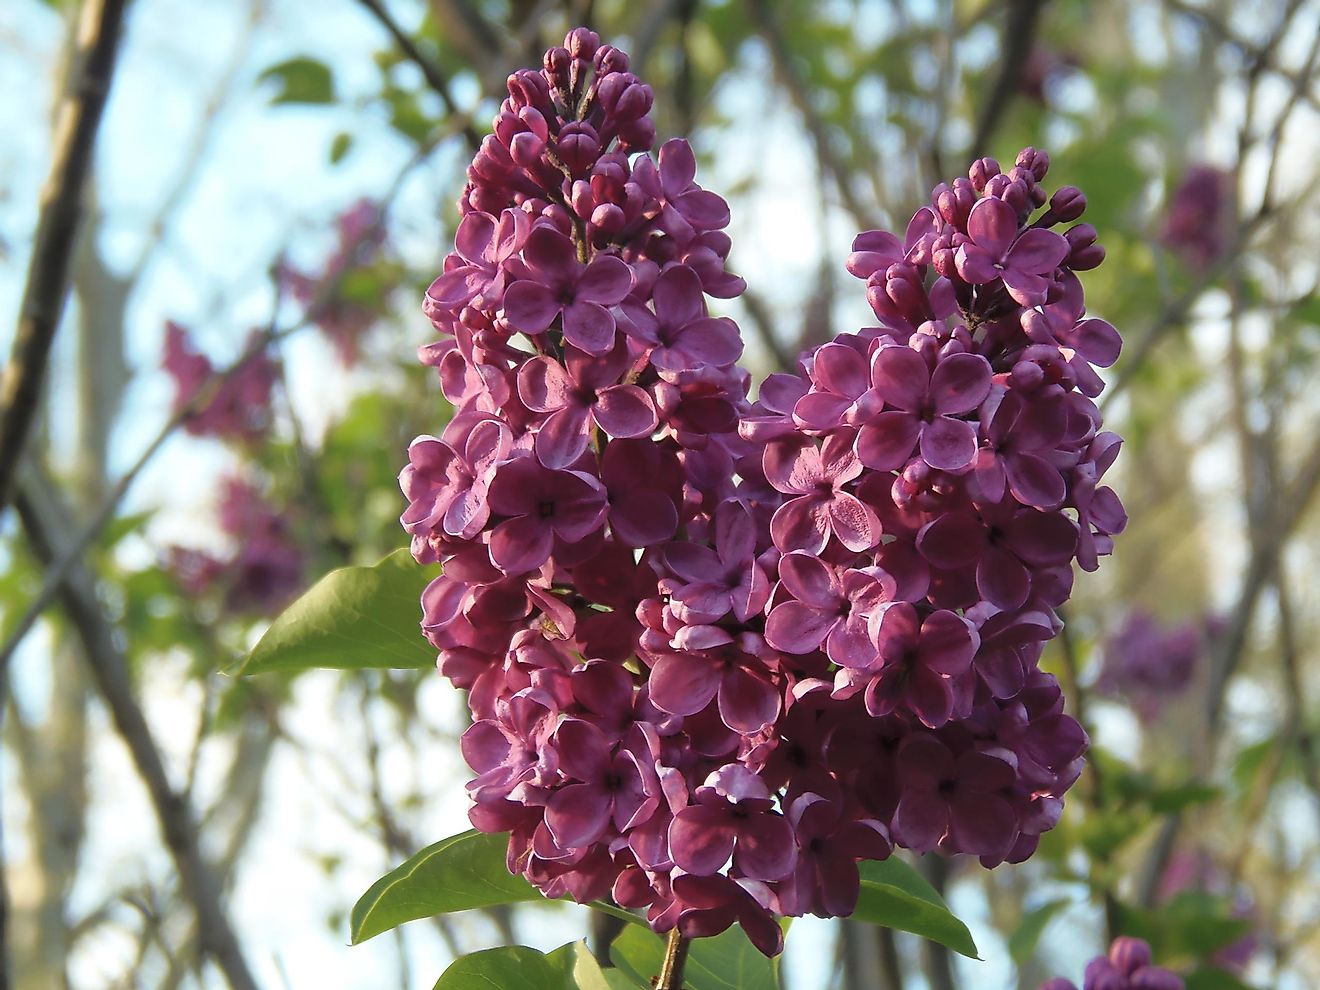 Lilacs blooming at the lilac festival